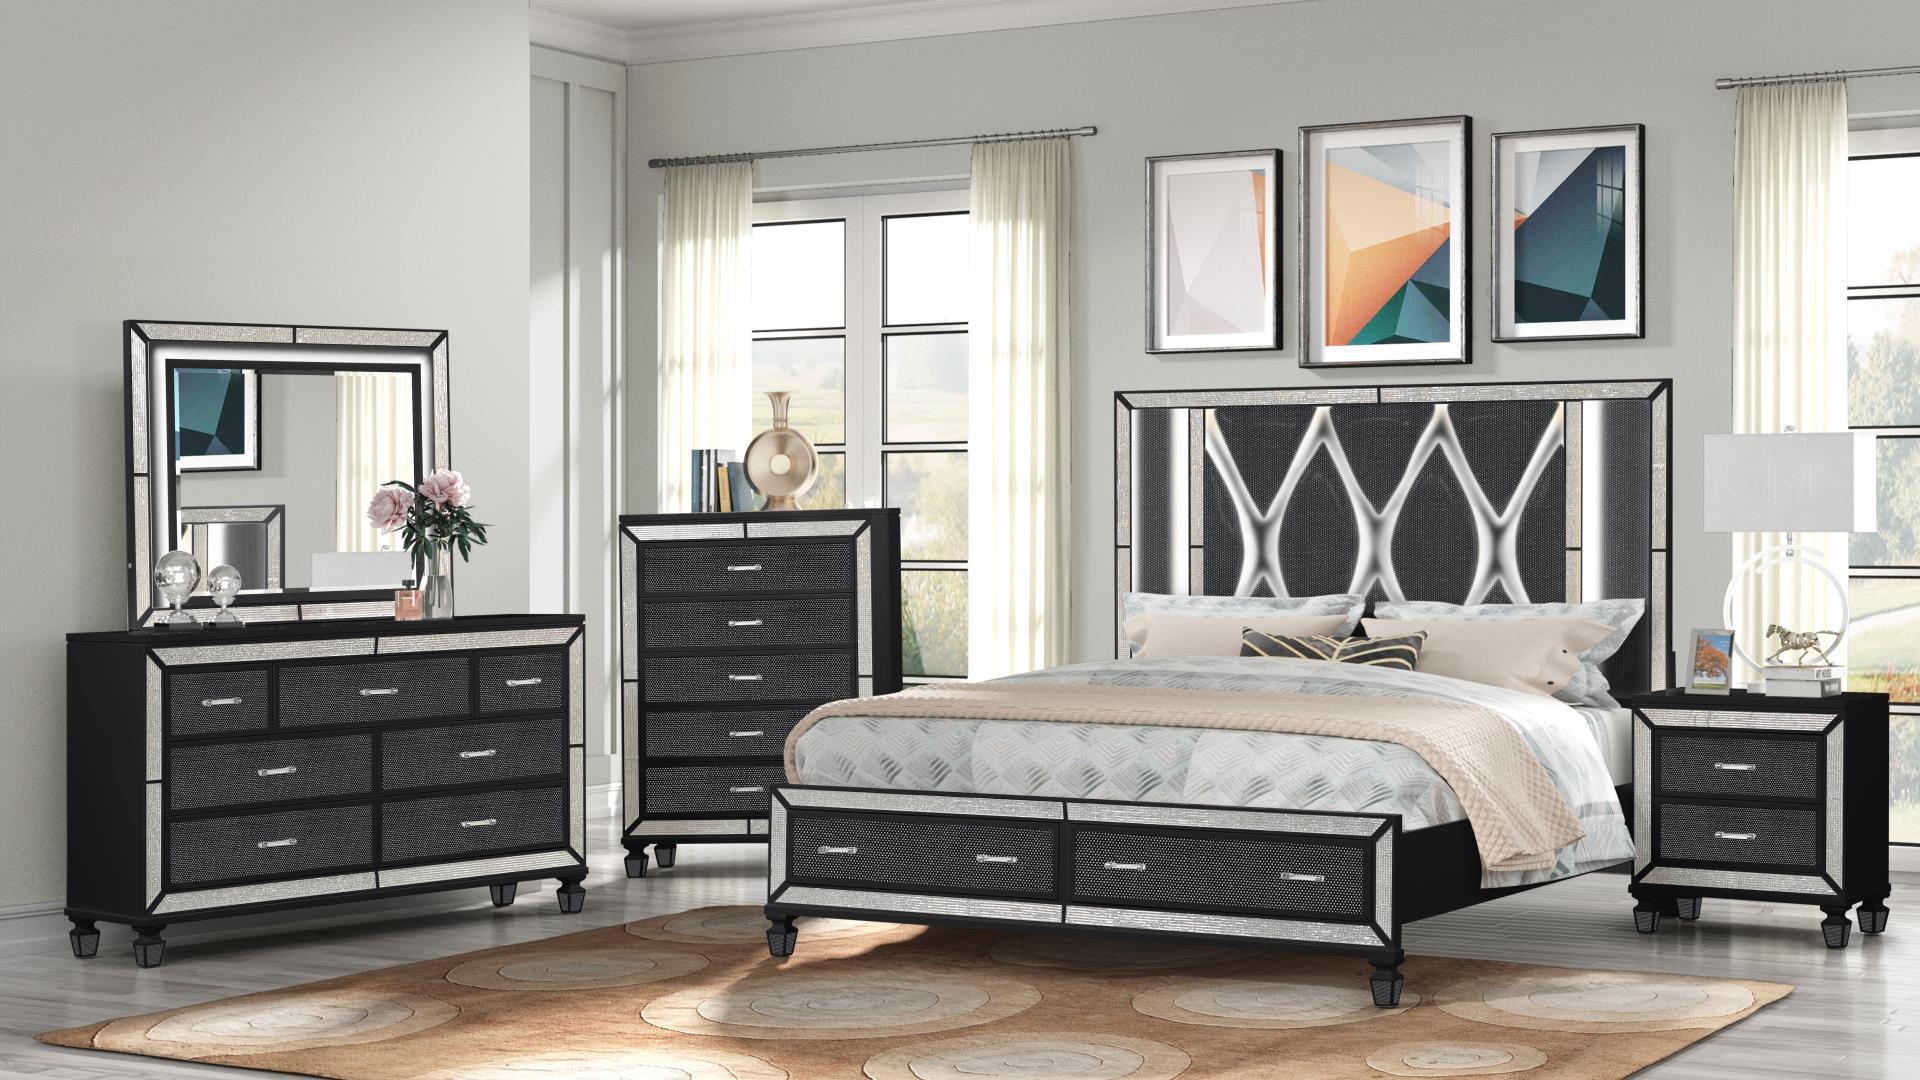 

    
Glam Black Solid Wood Storage Queen Bed CRYSTAL Galaxy Home Modern Contemporary
